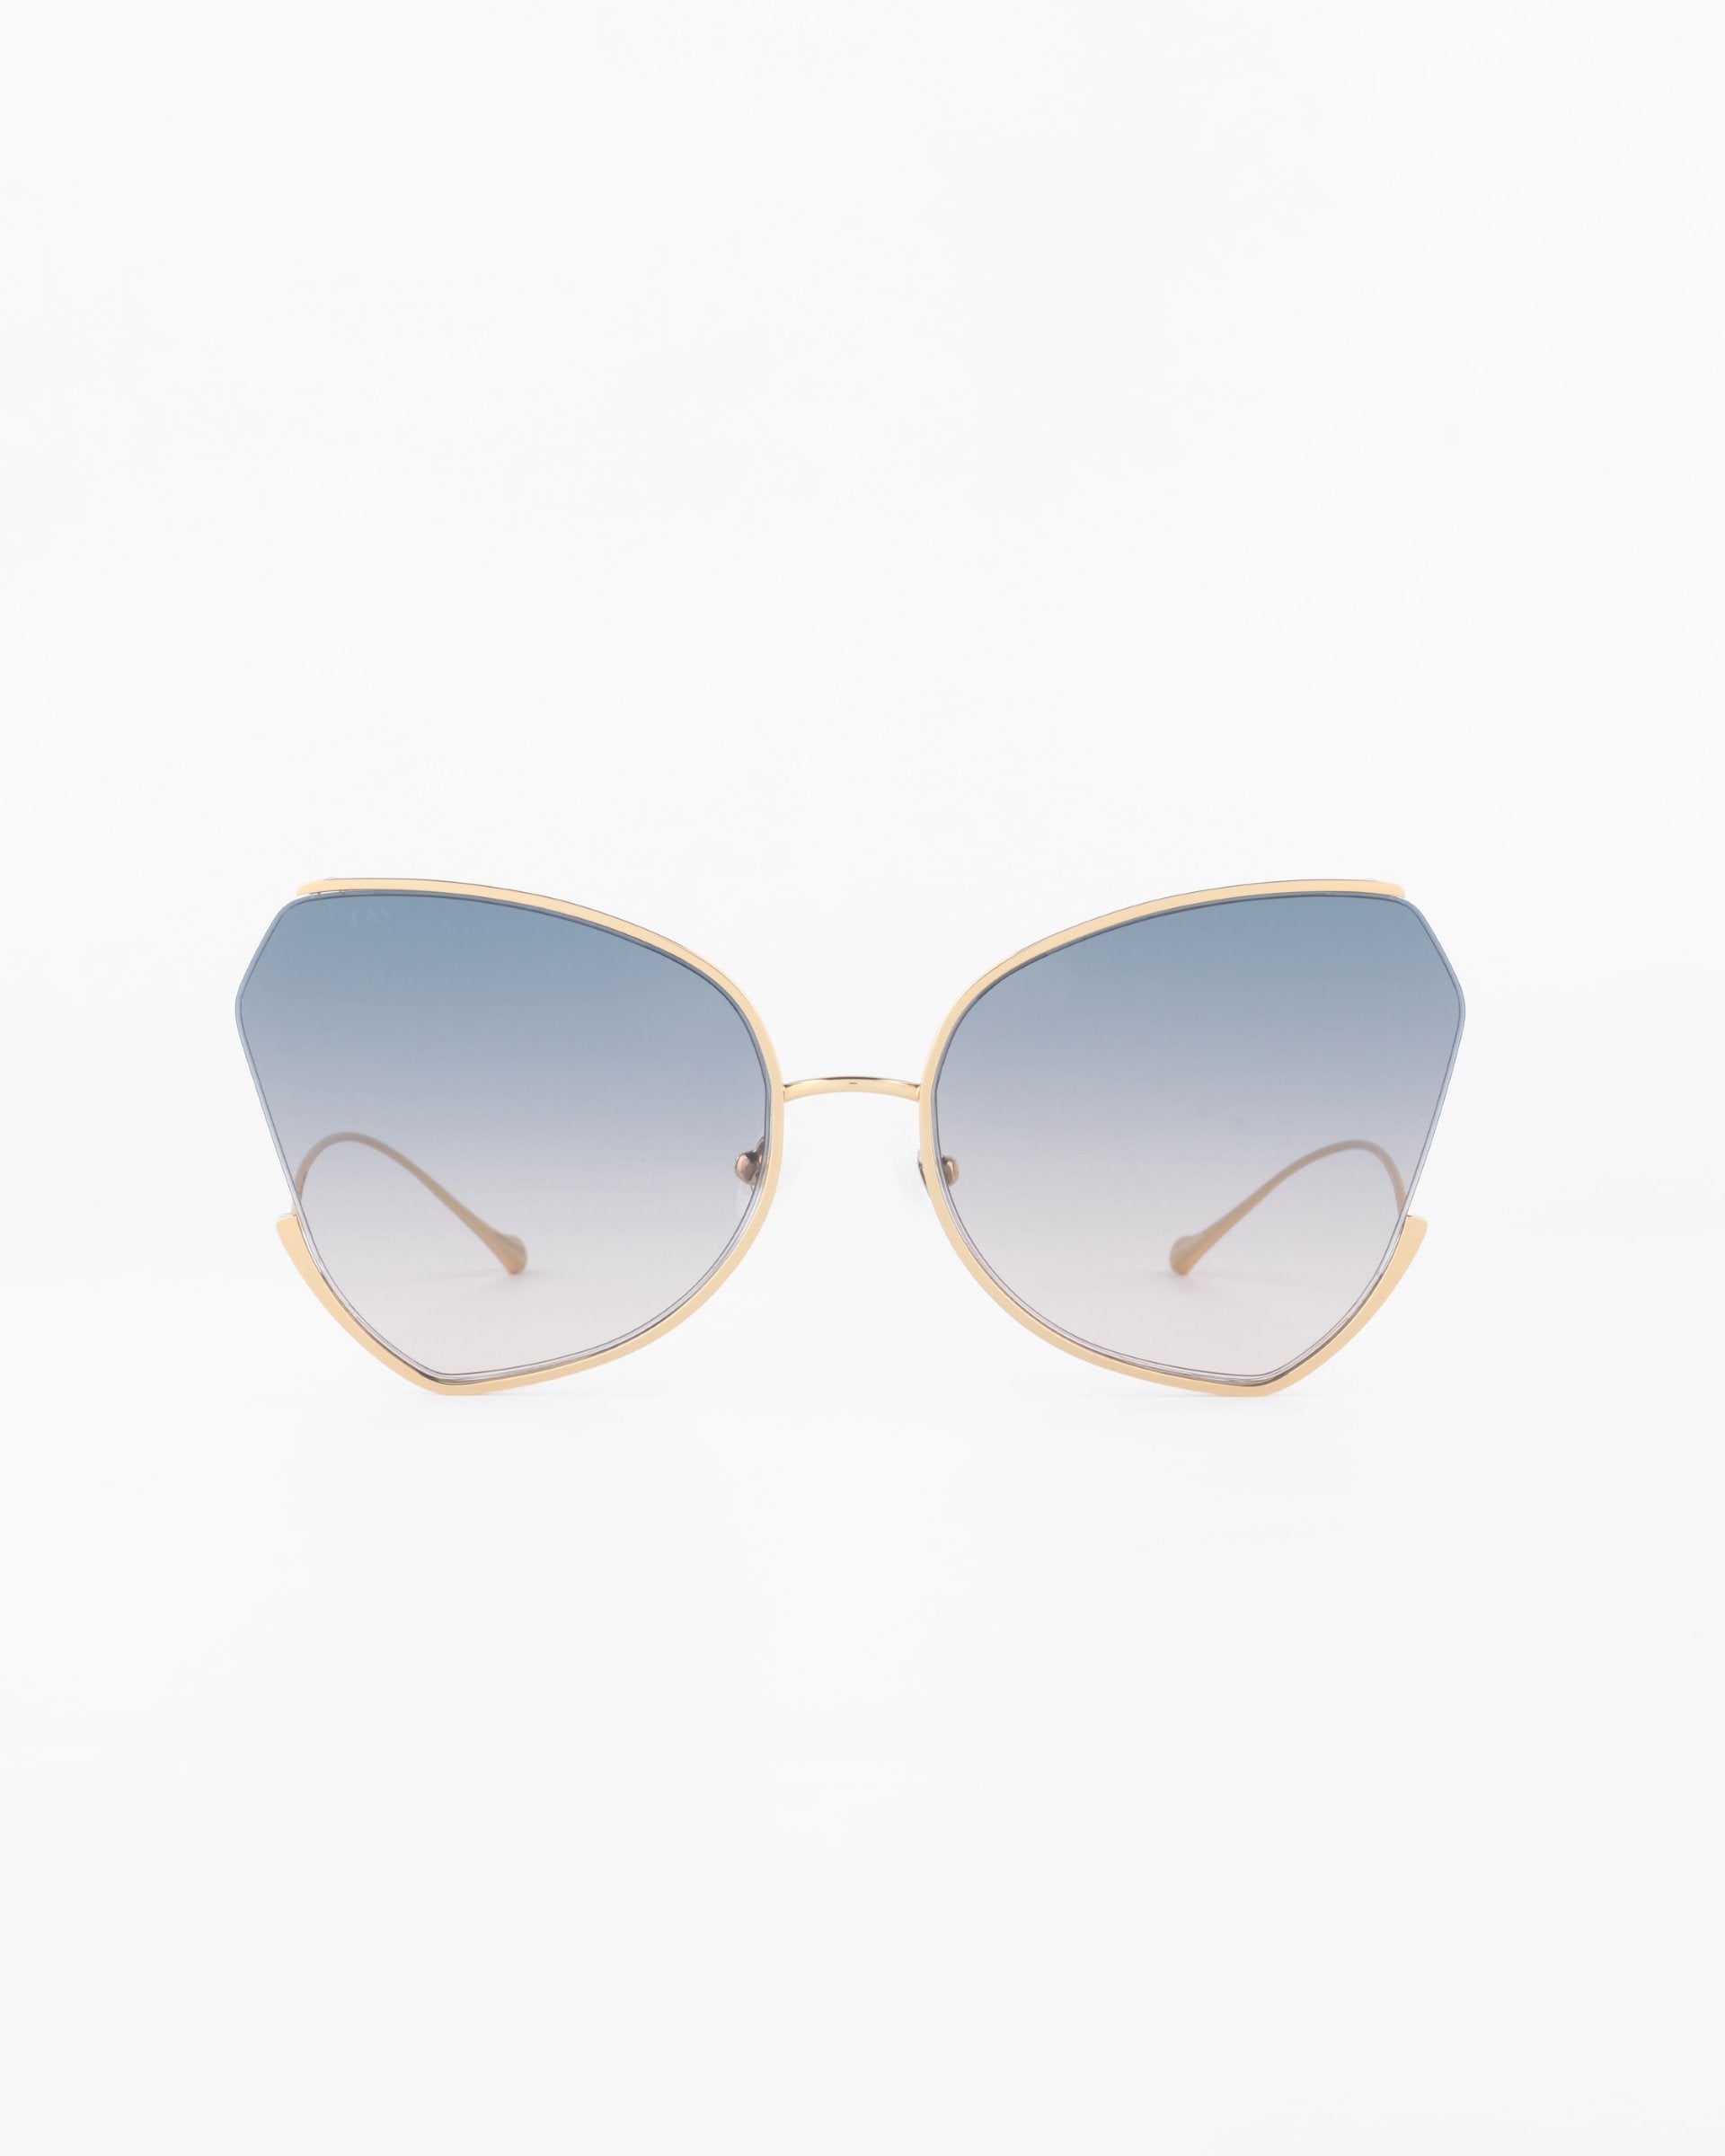 Close-up of a pair of Watercolour sunglasses by For Art&#39;s Sake® with gold-plated stainless steel frames and large, gradient blue lenses. The glasses have a sleek, modern design with slightly geometric lenses, offering UV protection. The background is a clean, plain white.